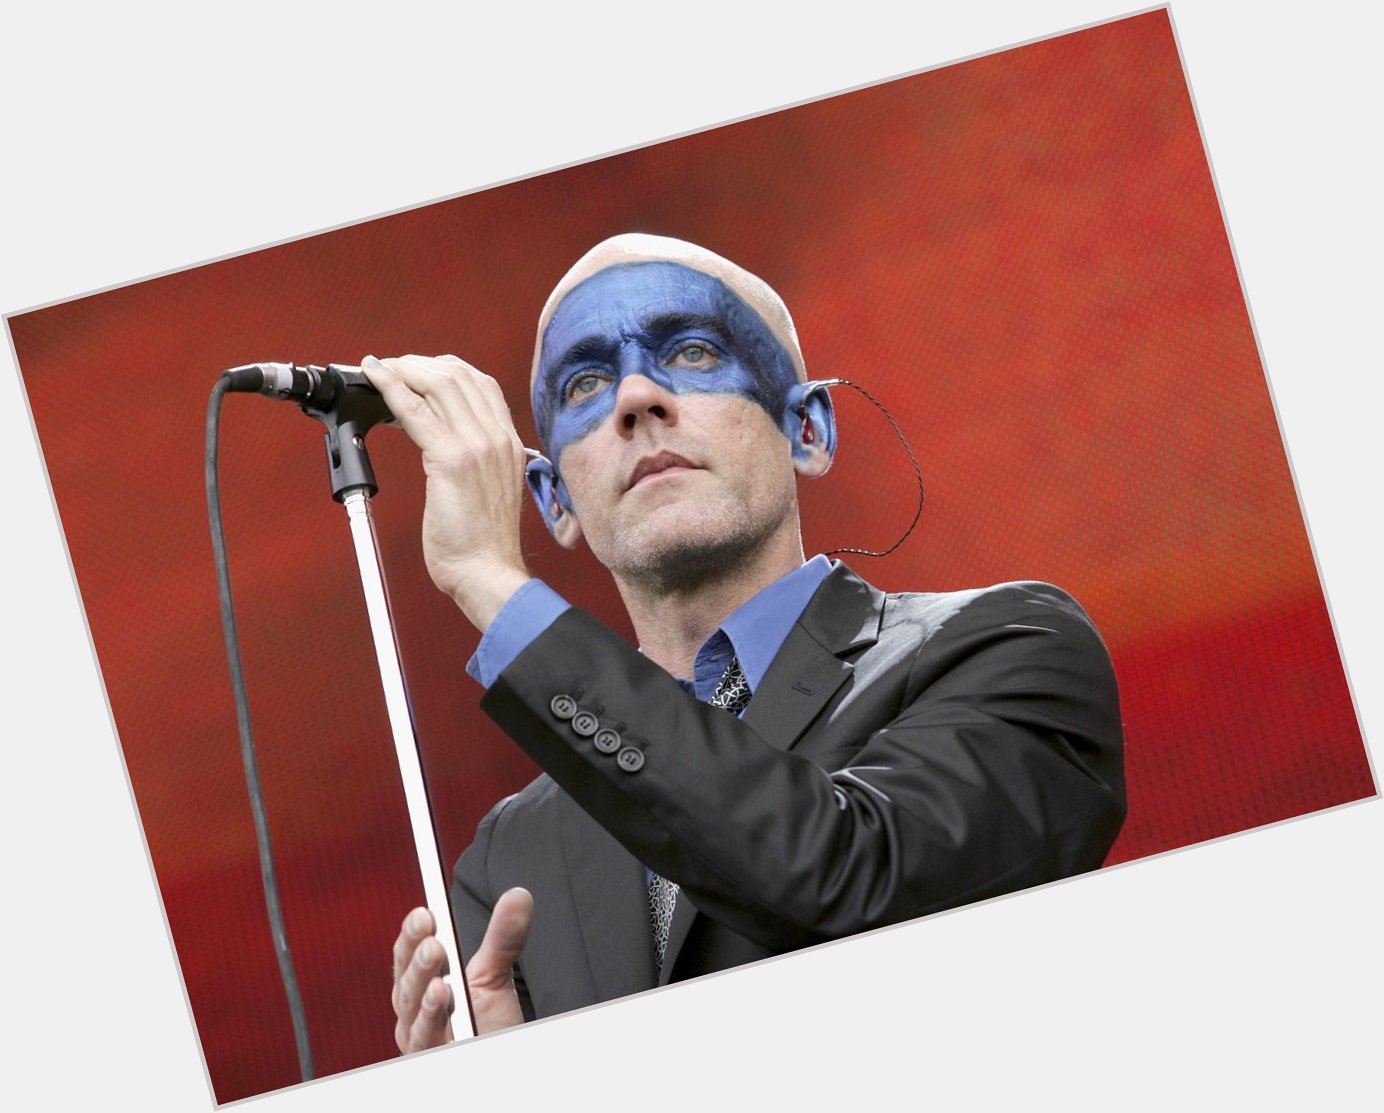  Happy Birthday, Michael Stipe! (57) Please, feel free to follow us on our Site! Greetings from Argentina! 